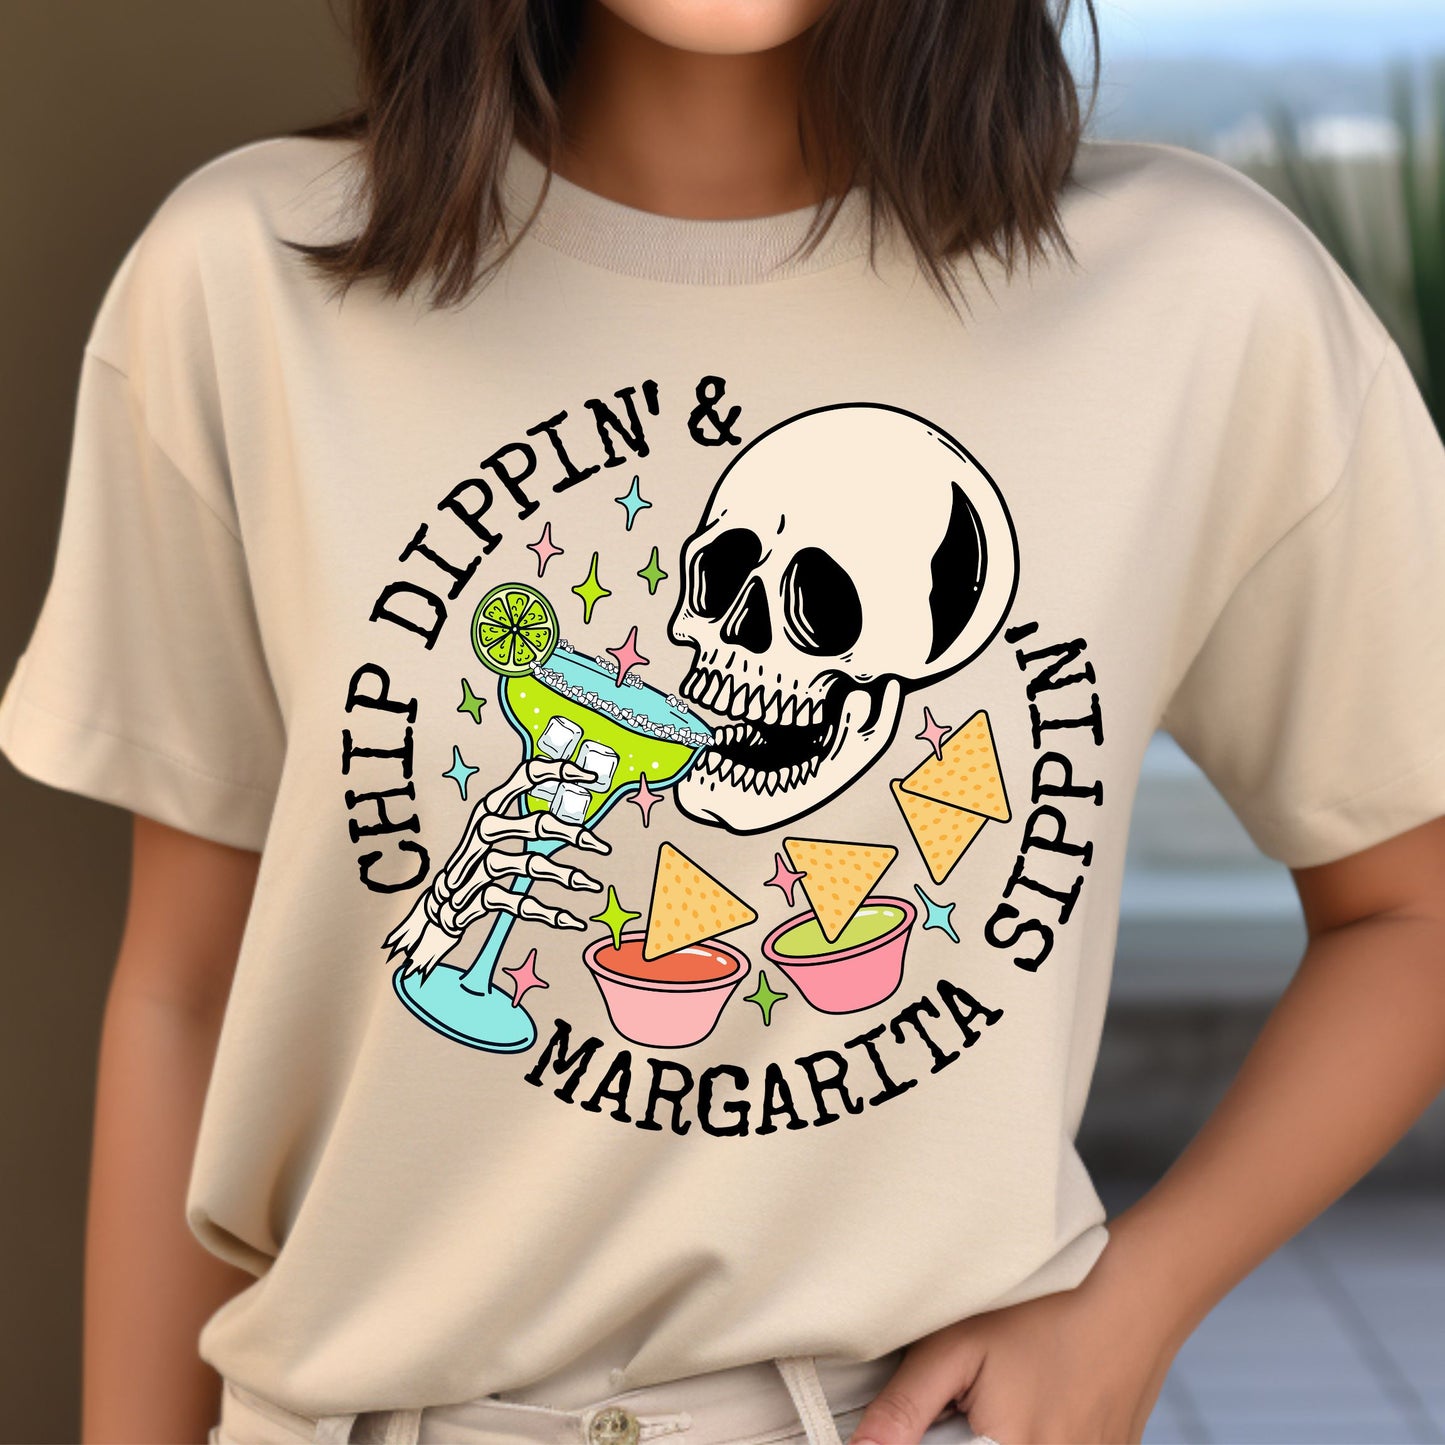 Chip Dippin/Marg Sippin T-Shirt or Sweatshirt